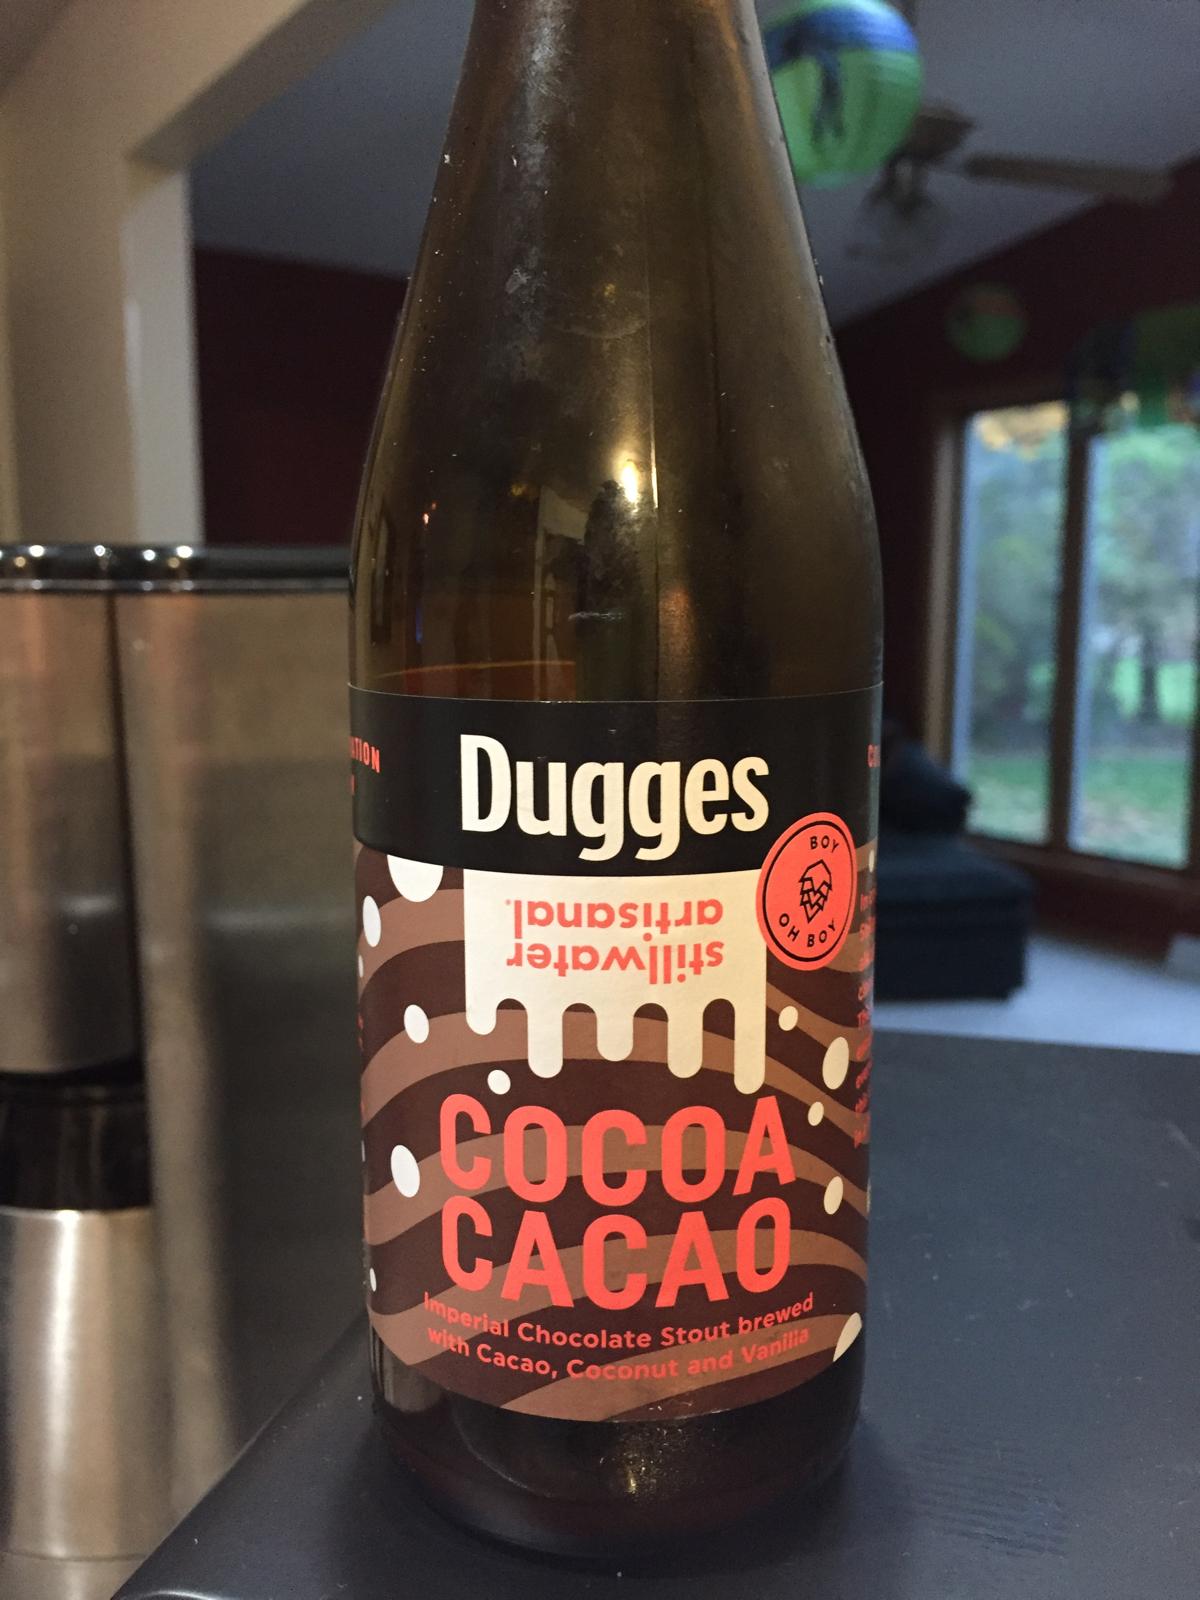 Cocoa Cacao (Collaboration with Stillwater)